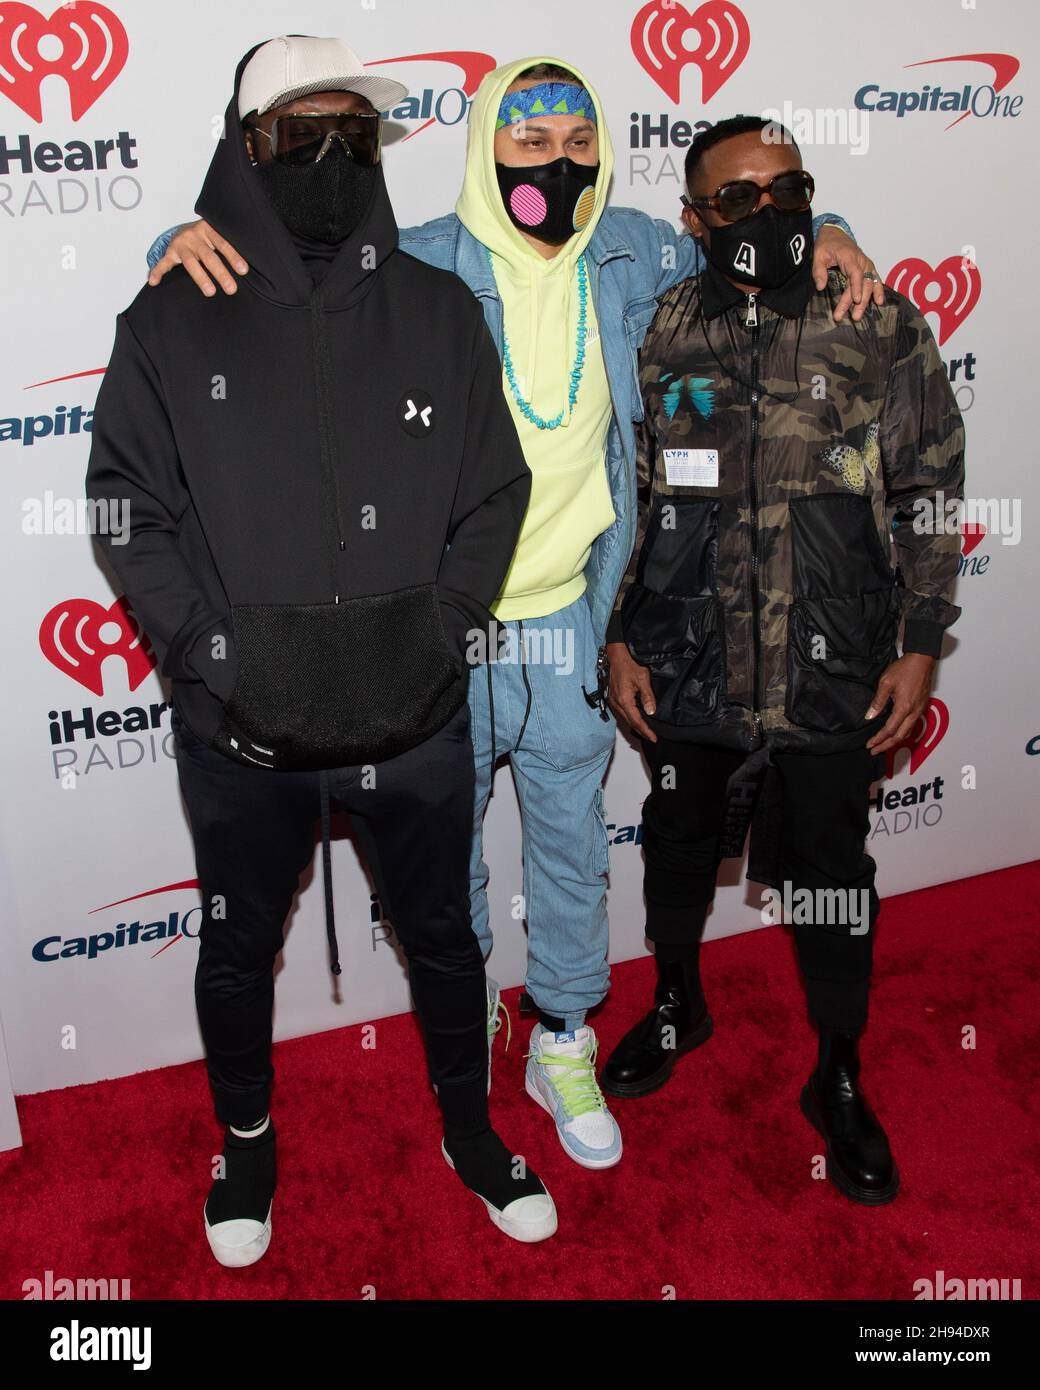 December 3, 2021, Los Angeles, California, USA: (L-R) will.i.am, Taboo, and apl.de.ap of Black Eyed Peas attend iHeartRadio 102.7 KIIS FM Jingle Ball. (Credit Image: © Billy Bennight/ZUMA Press Wire) Stock Photo